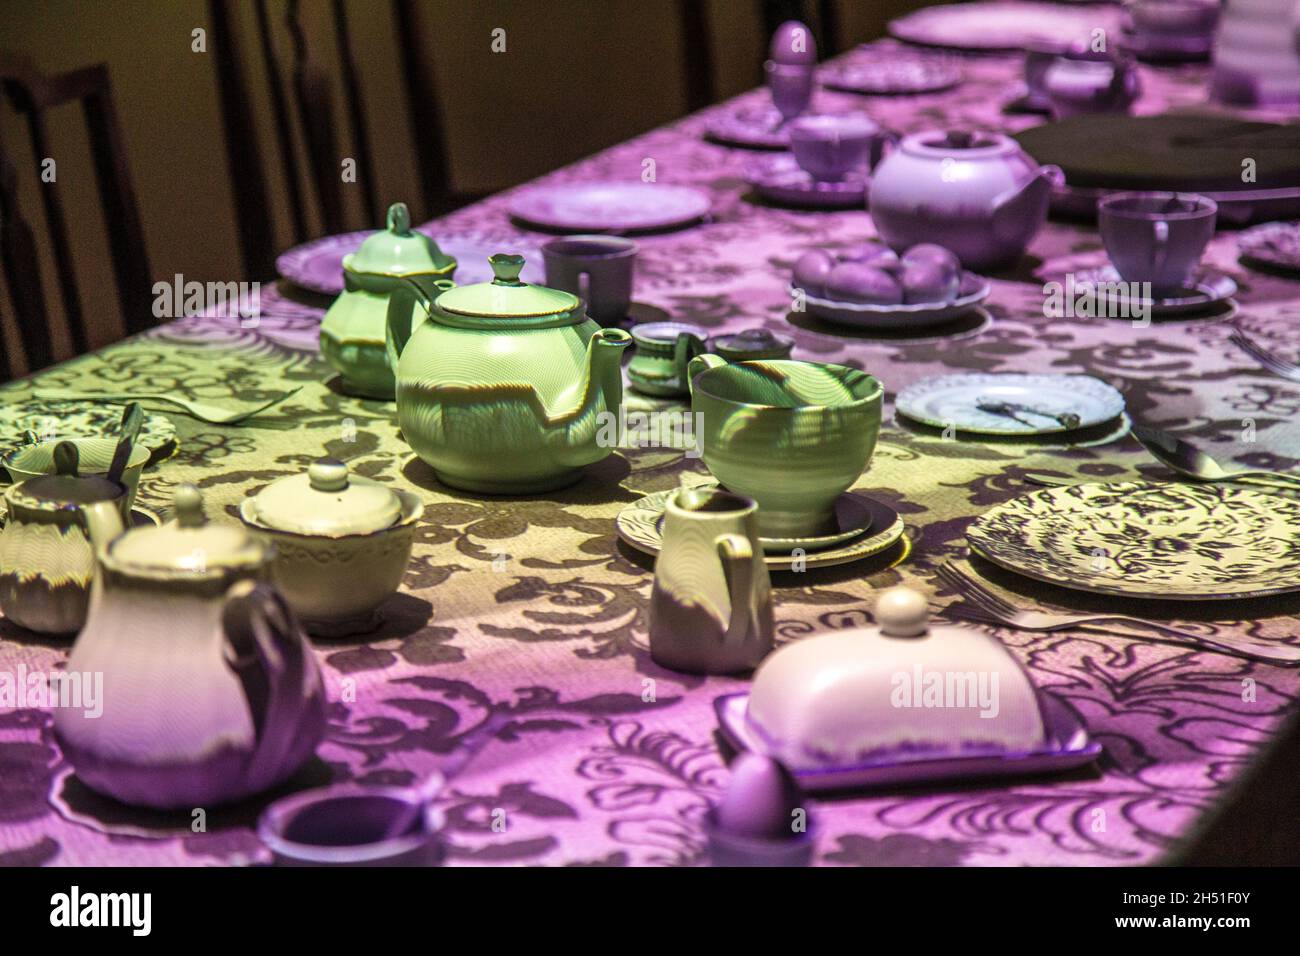 Heston Blumenthal and Dave Mckean’s re-imagination of the Mad Hatter’s tea party, patterns are projected onto white tableware, 'Alice: Curiouser and Curiouser' 2021 exhibition at the V&A, London, UK Stock Photo